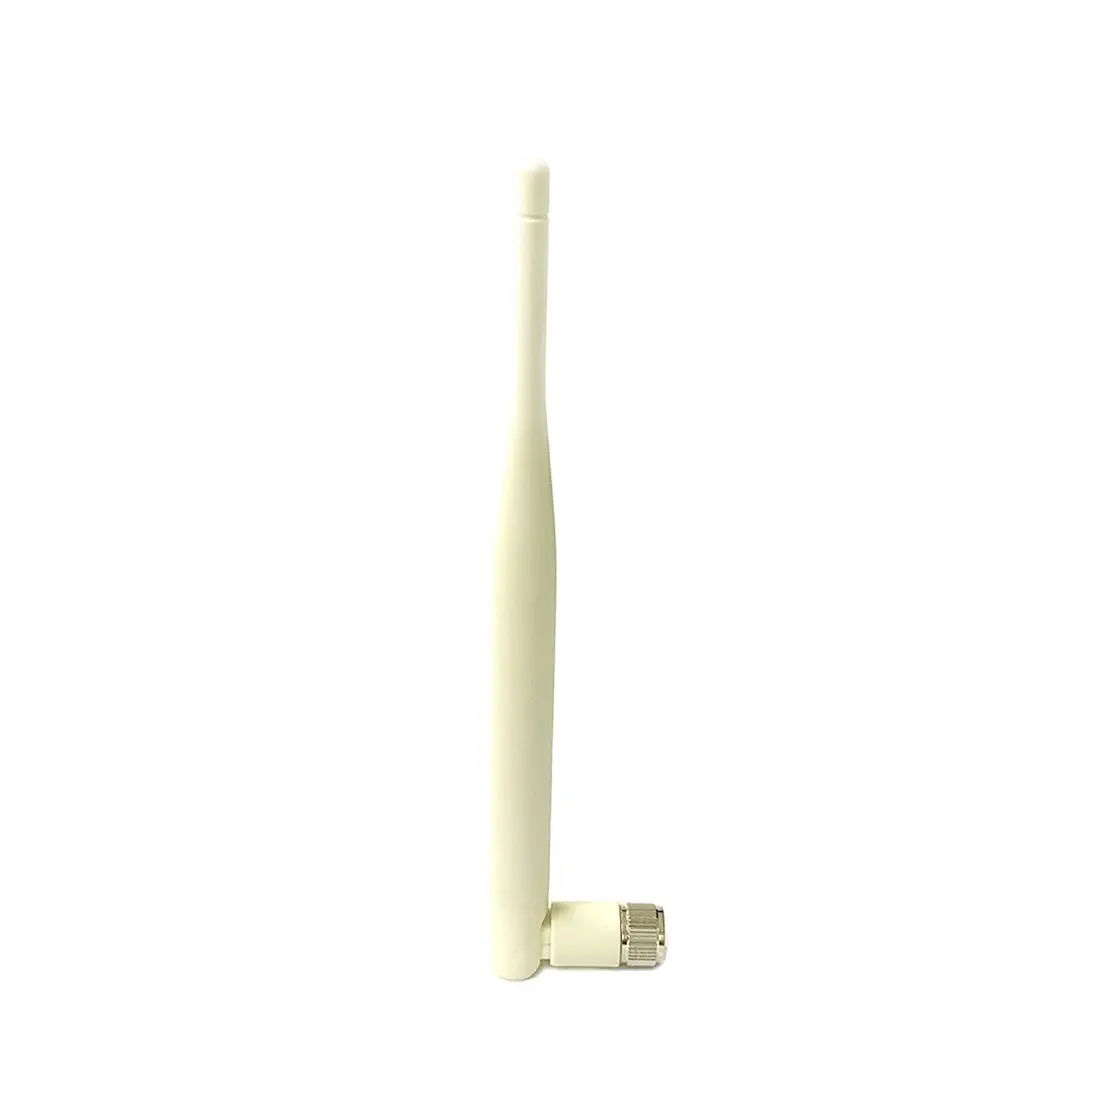 

1PC Wifi Antenna 2.4GHz 6dbi High Gain Omni Aerial RP-SMA Connector Signal Strengthen White AP High Quality NEW Wholesale